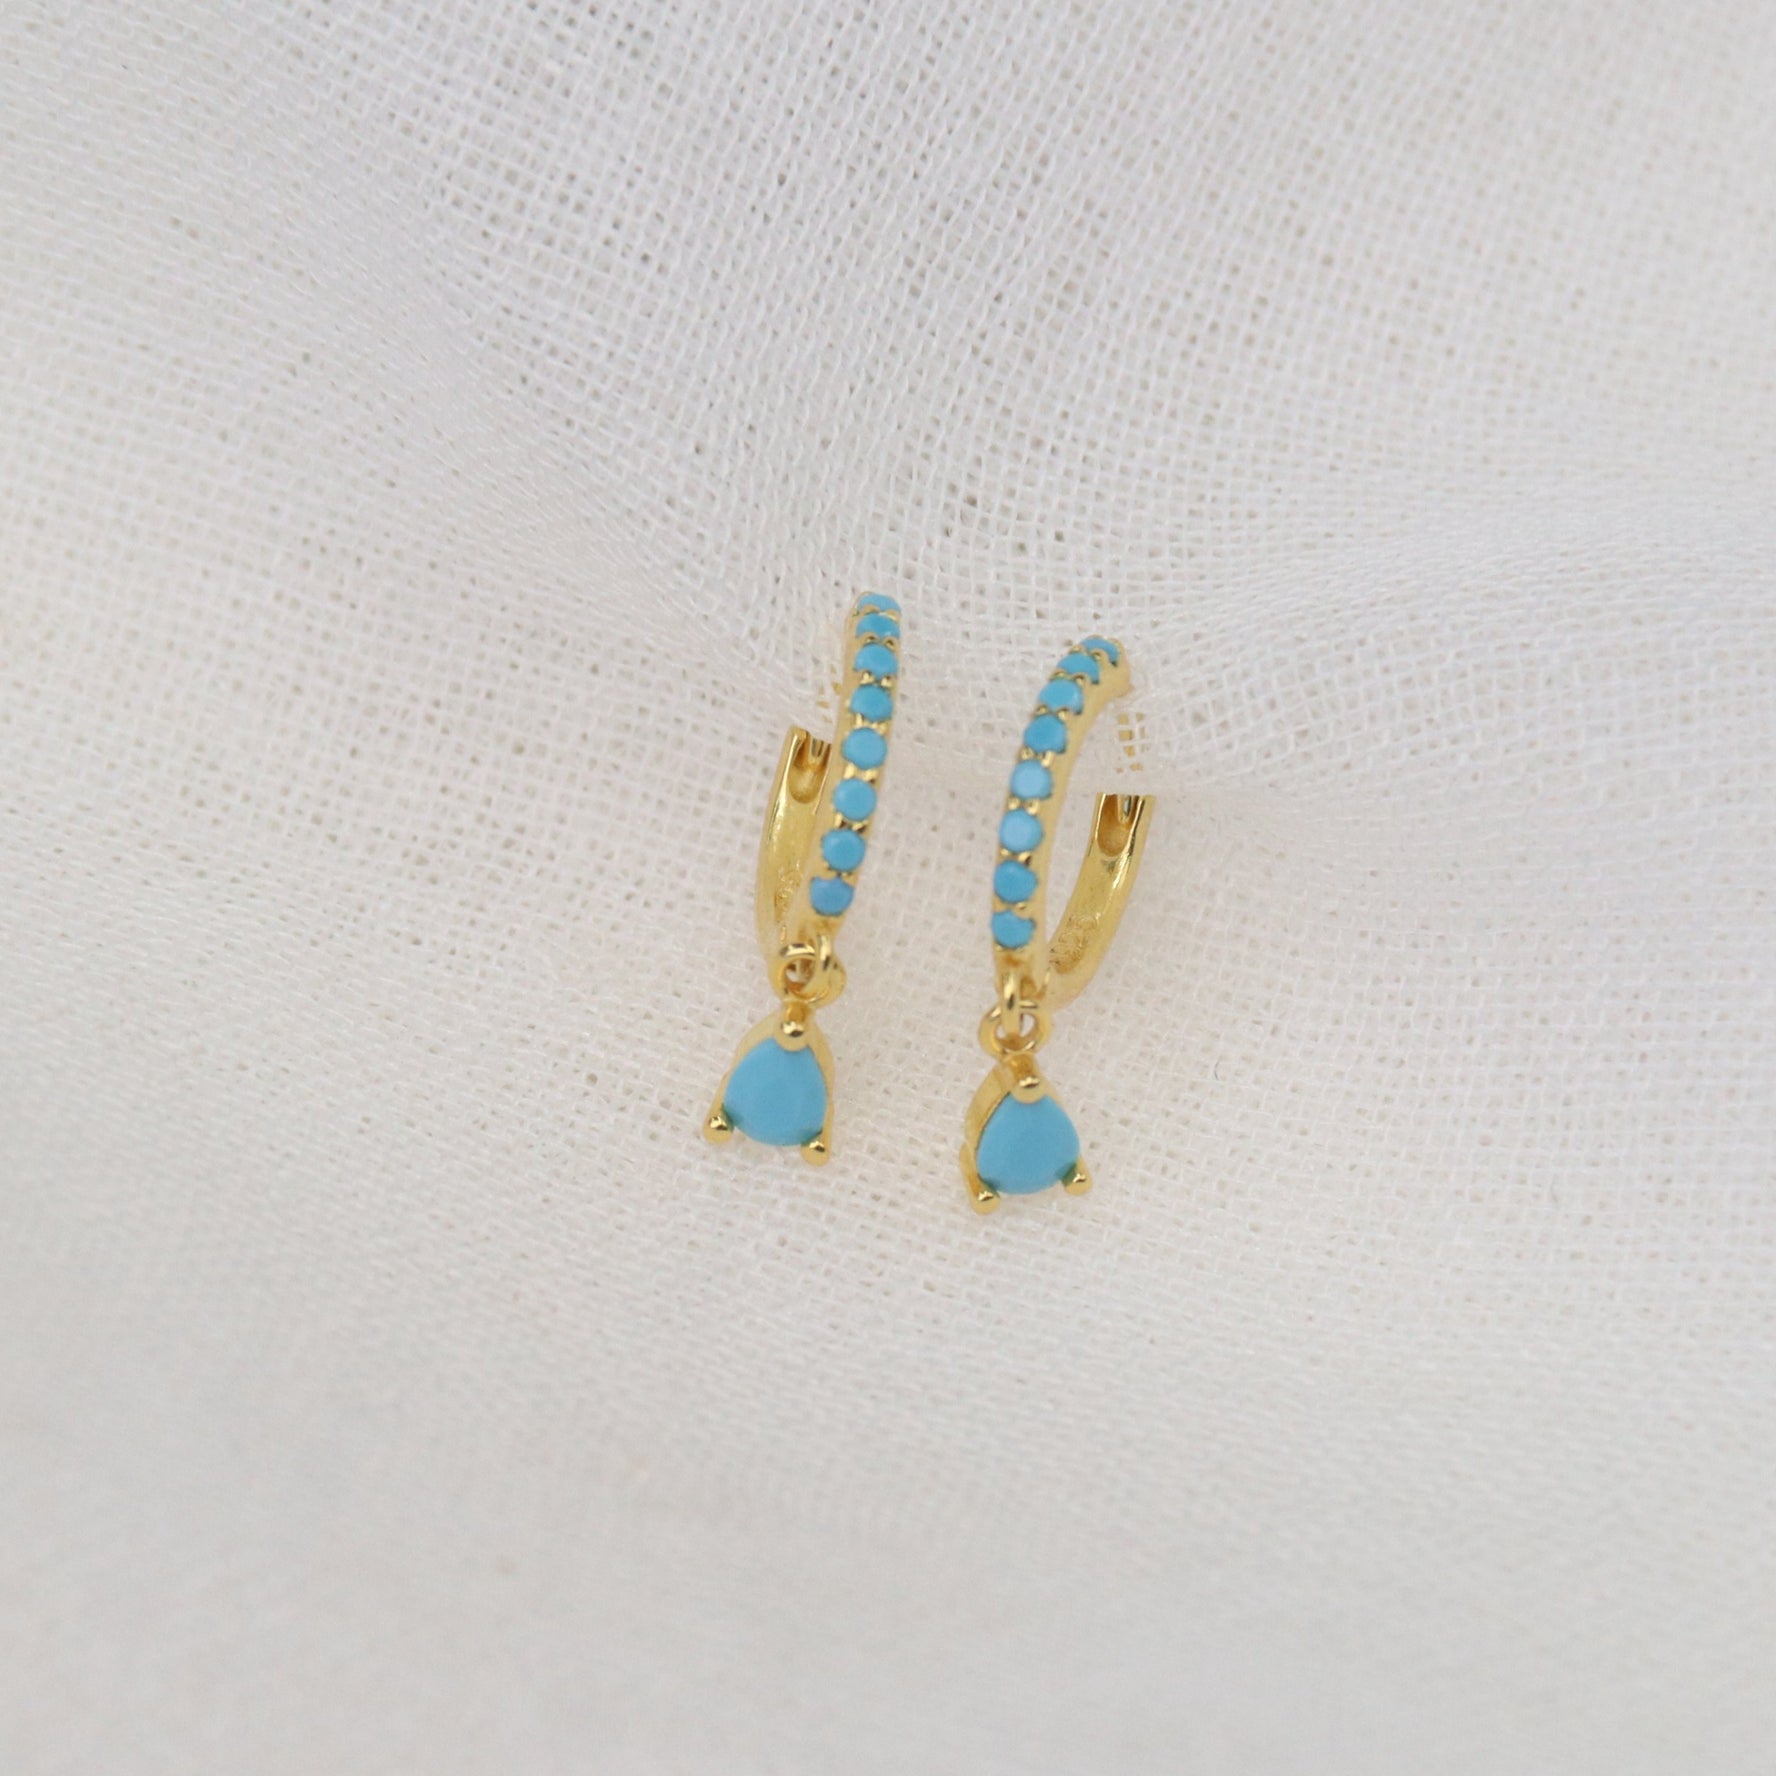 Tash | 18 Gold Plated Sterling Silver Huggies with Turquoise Zircons